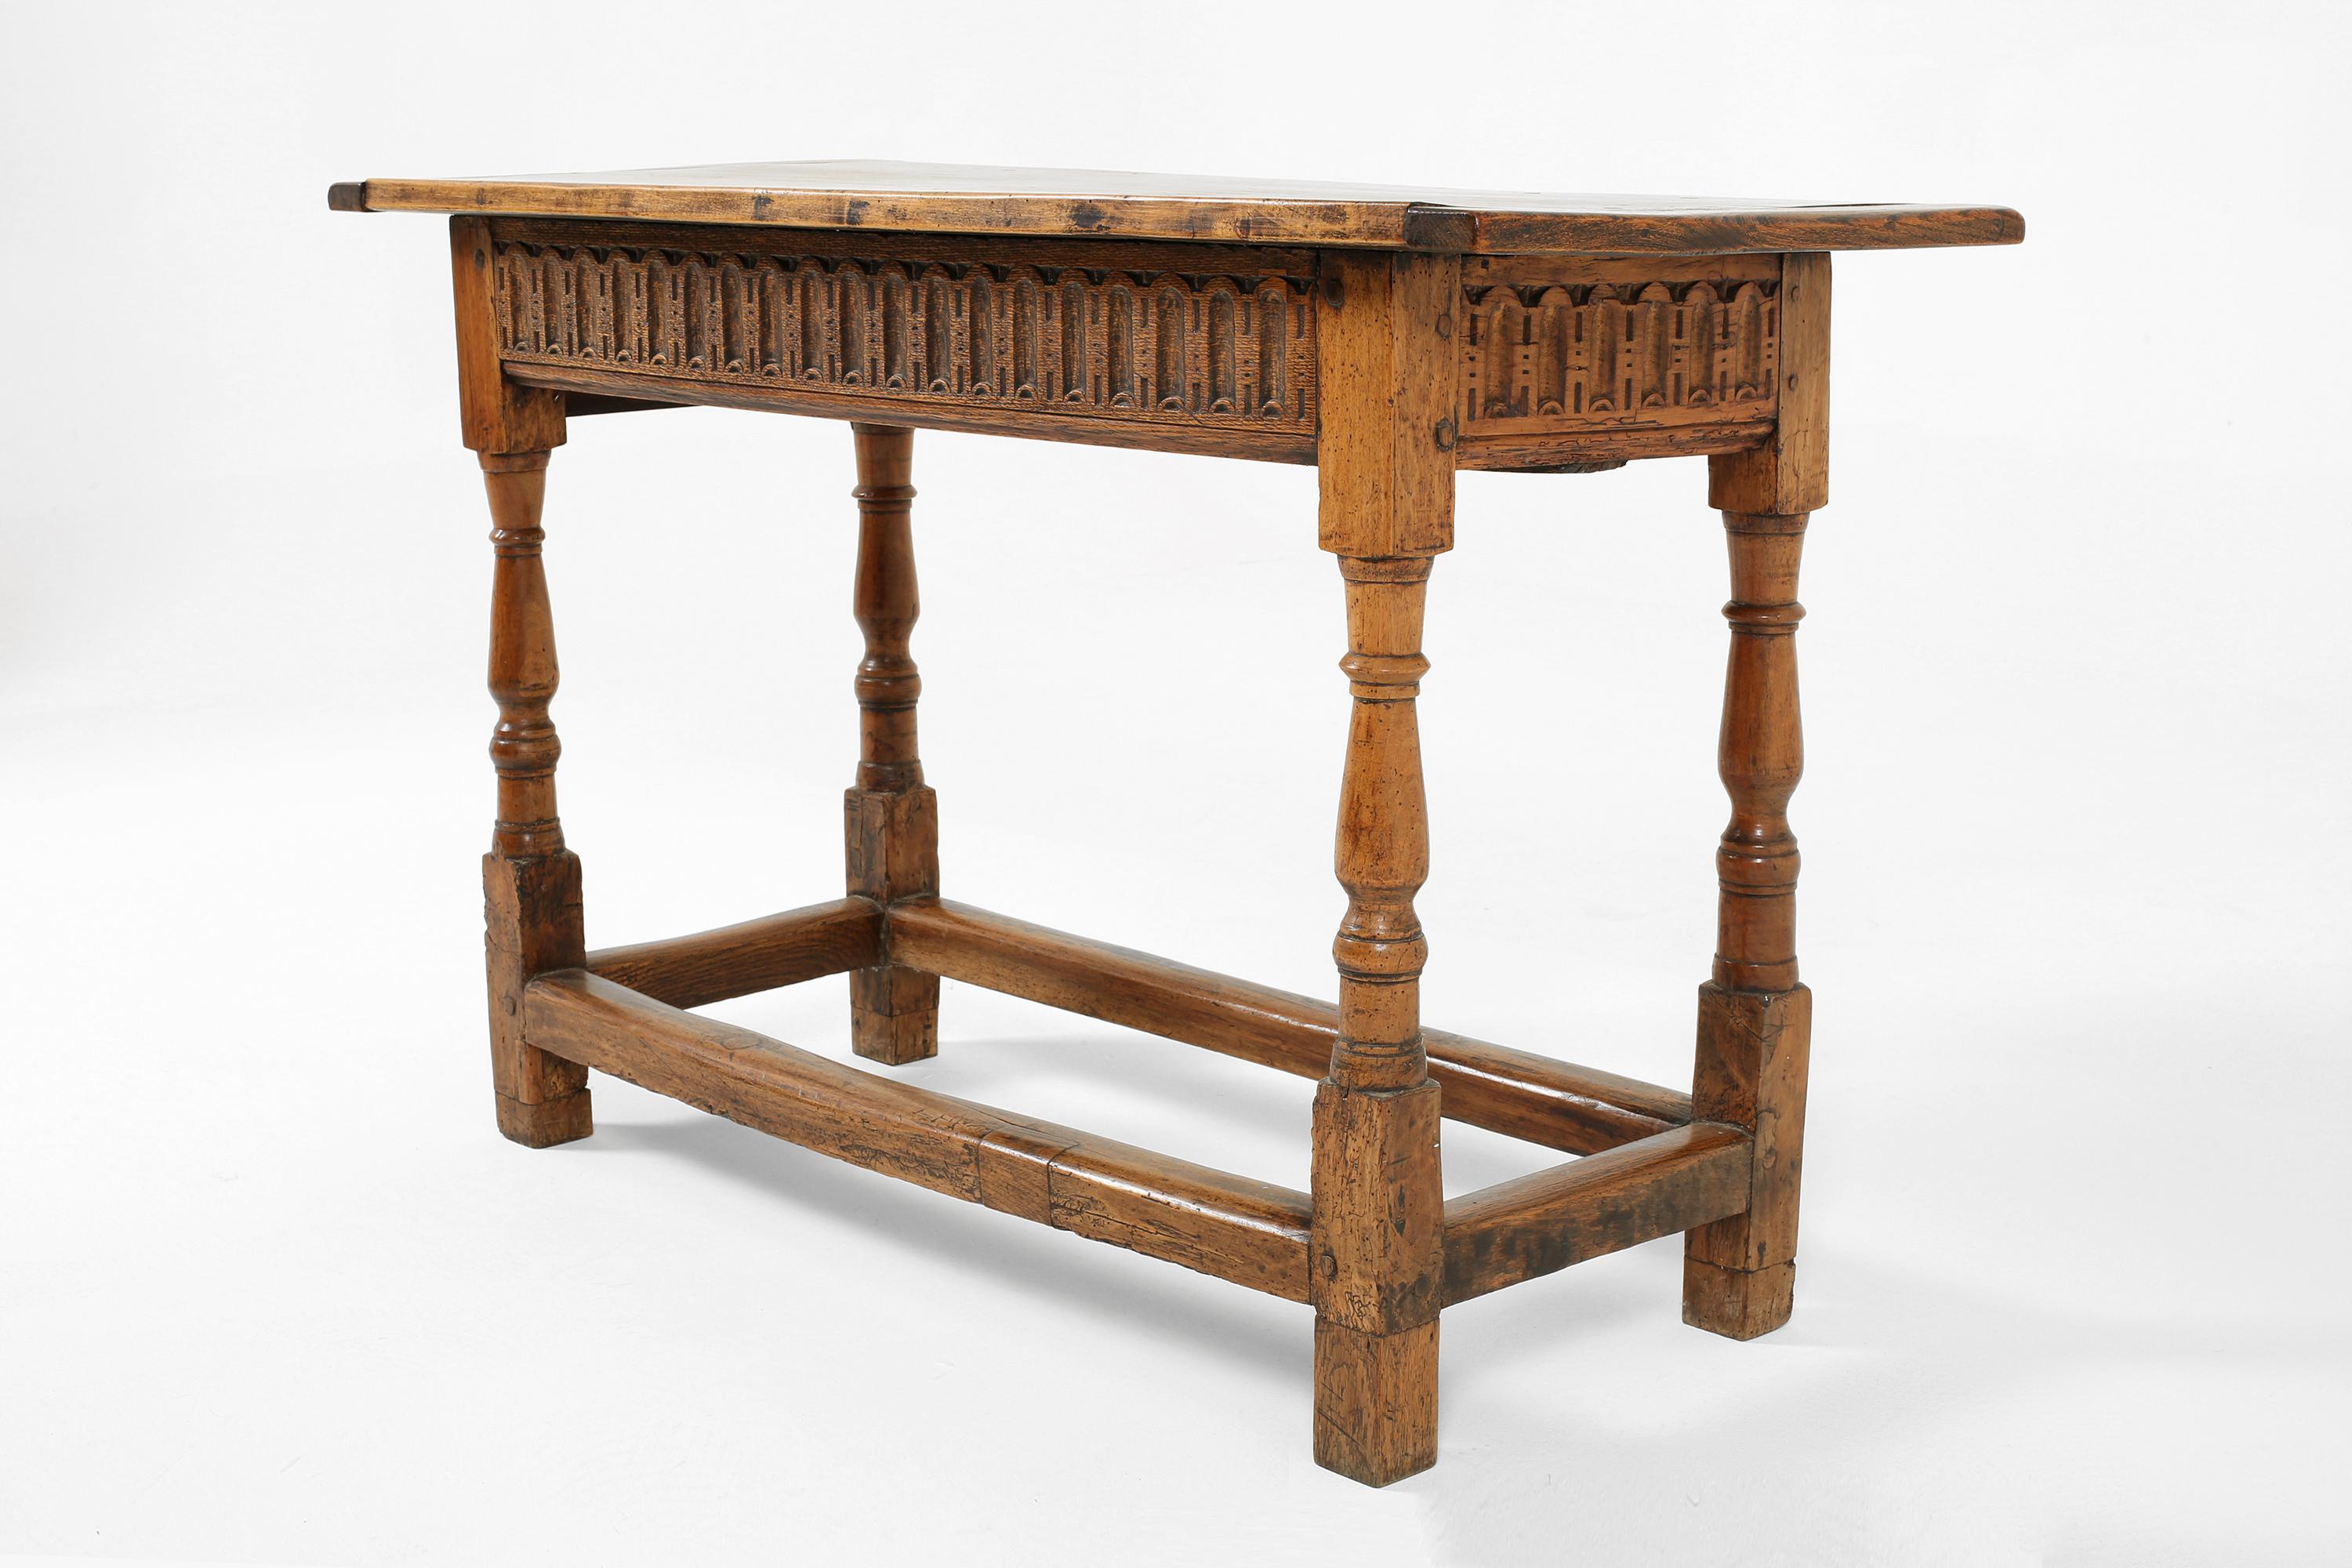 A walnut and oak console or lamp table with a decorative carved frieze, turned legs and a two plank top with cleated ends. Spanish, 17th century with some later elements.